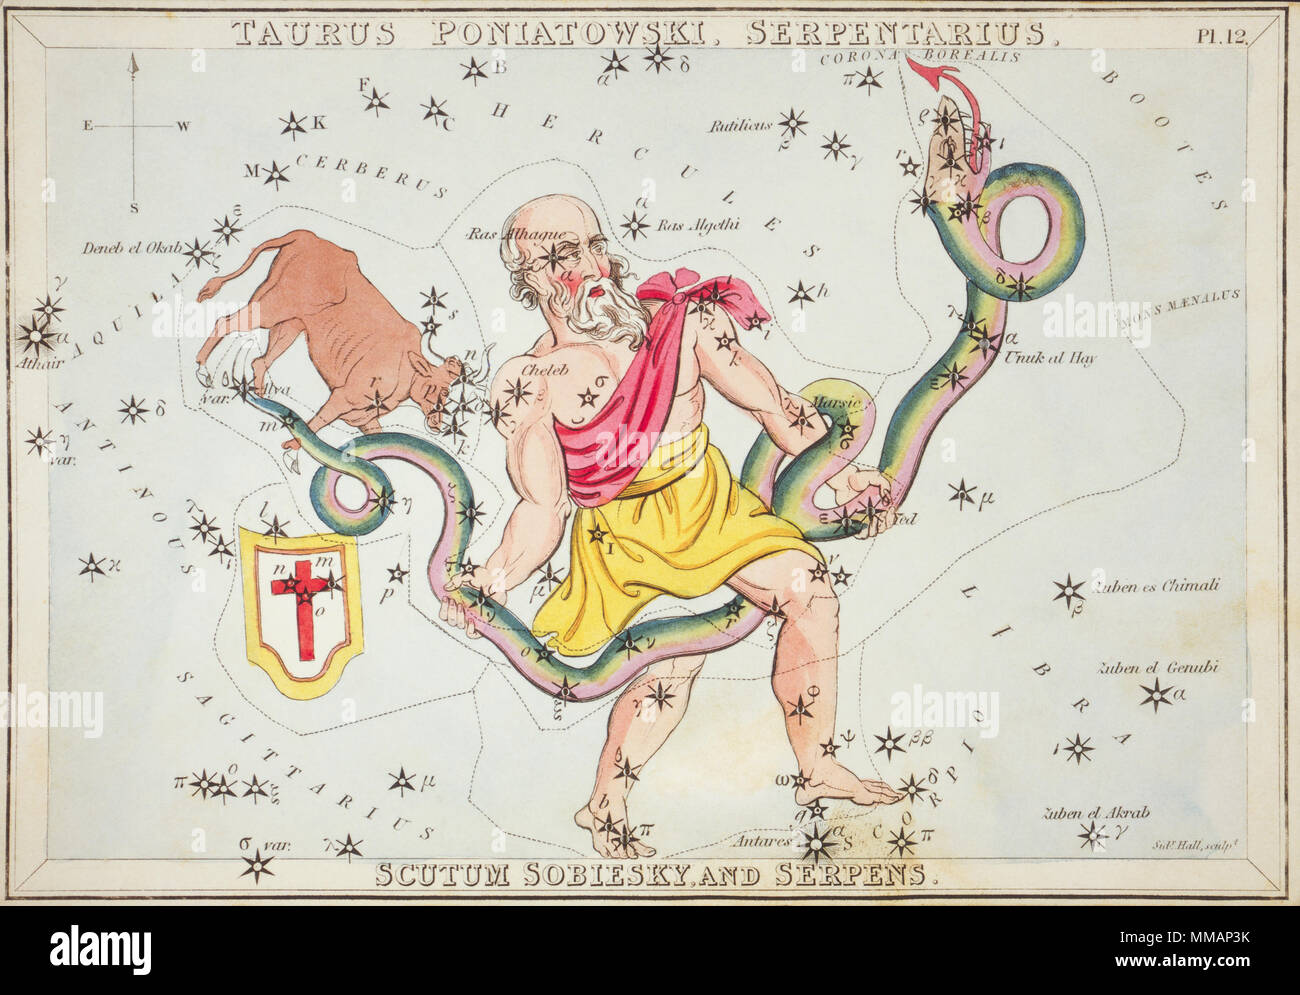 Taurus Poniatowski, Serpentarius, Scutum Sobiesky, and Serpens. Card Number 12 from Urania's Mirror, or A View of the Heavens, one of a set of 32 astronomical star chart cards engraved by Sidney Hall and publshed 1824. Stock Photo